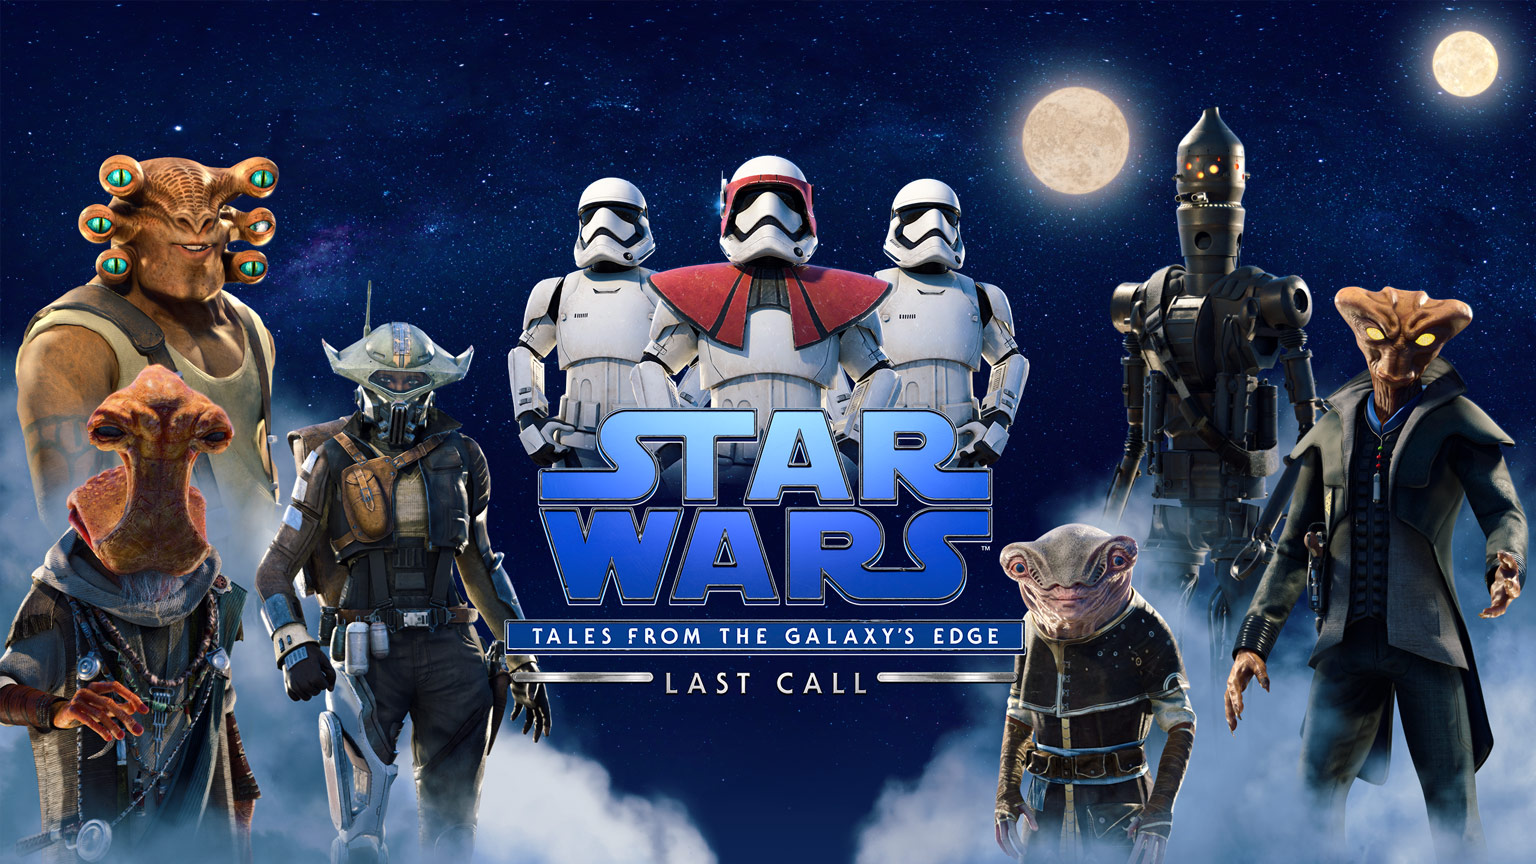 Title screen image for Star Wars Tales from the Galaxy's Edge: Last Call featuring aliens, droids and Stormtroopers